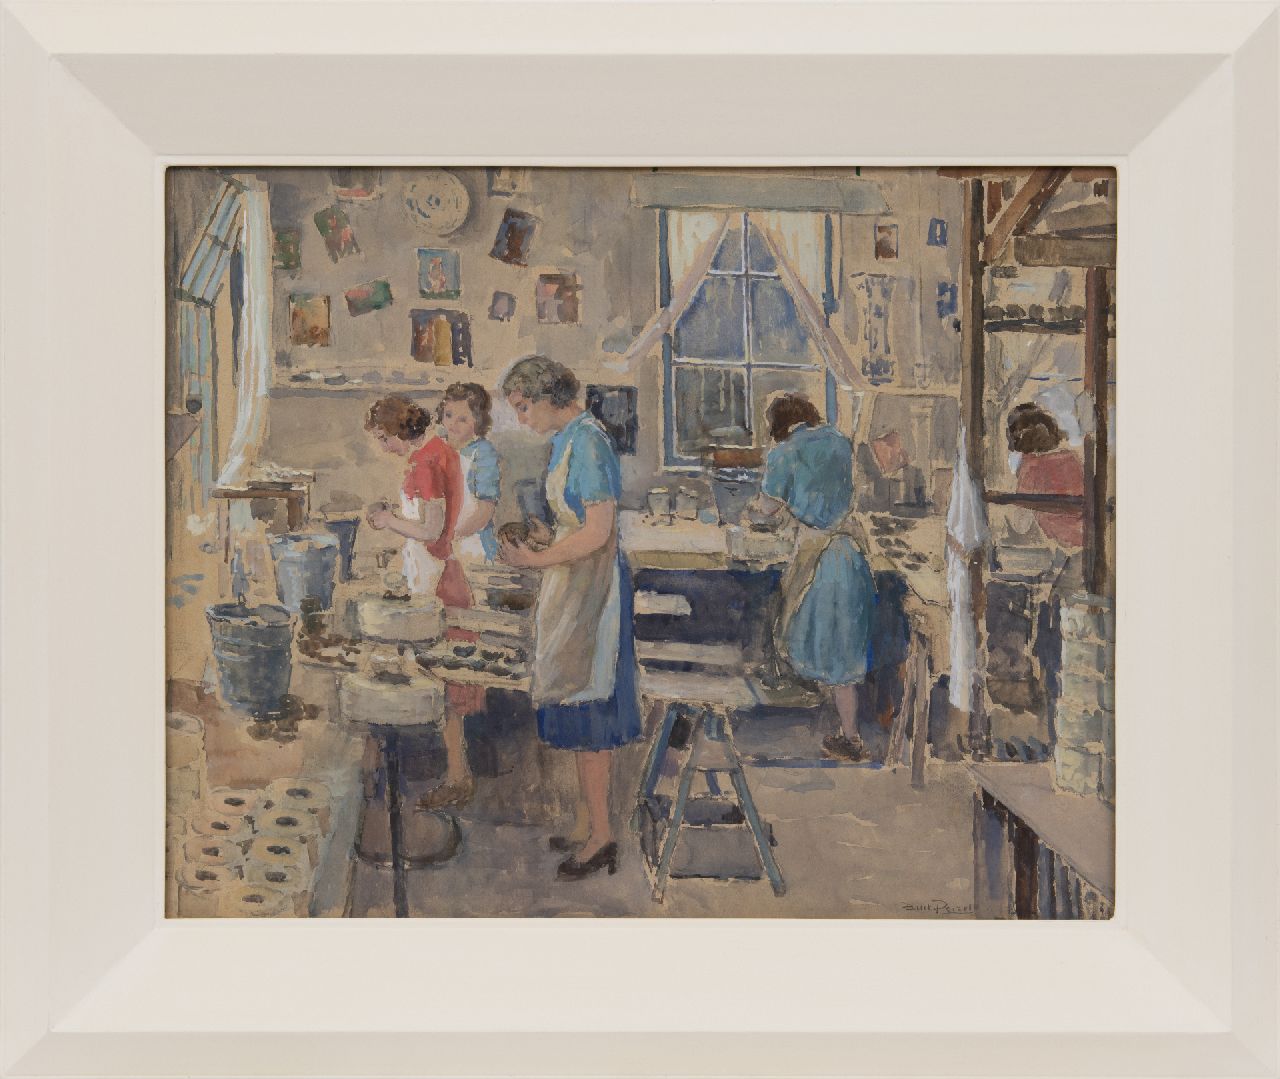 Peizel B.  | Bartele 'Bart' Peizel | Watercolours and drawings offered for sale | Polishing cups in the factory Royal Goedewaagen, Gouda, watercolour on paper laid down on board 39.5 x 49.2 cm, signed l.r.